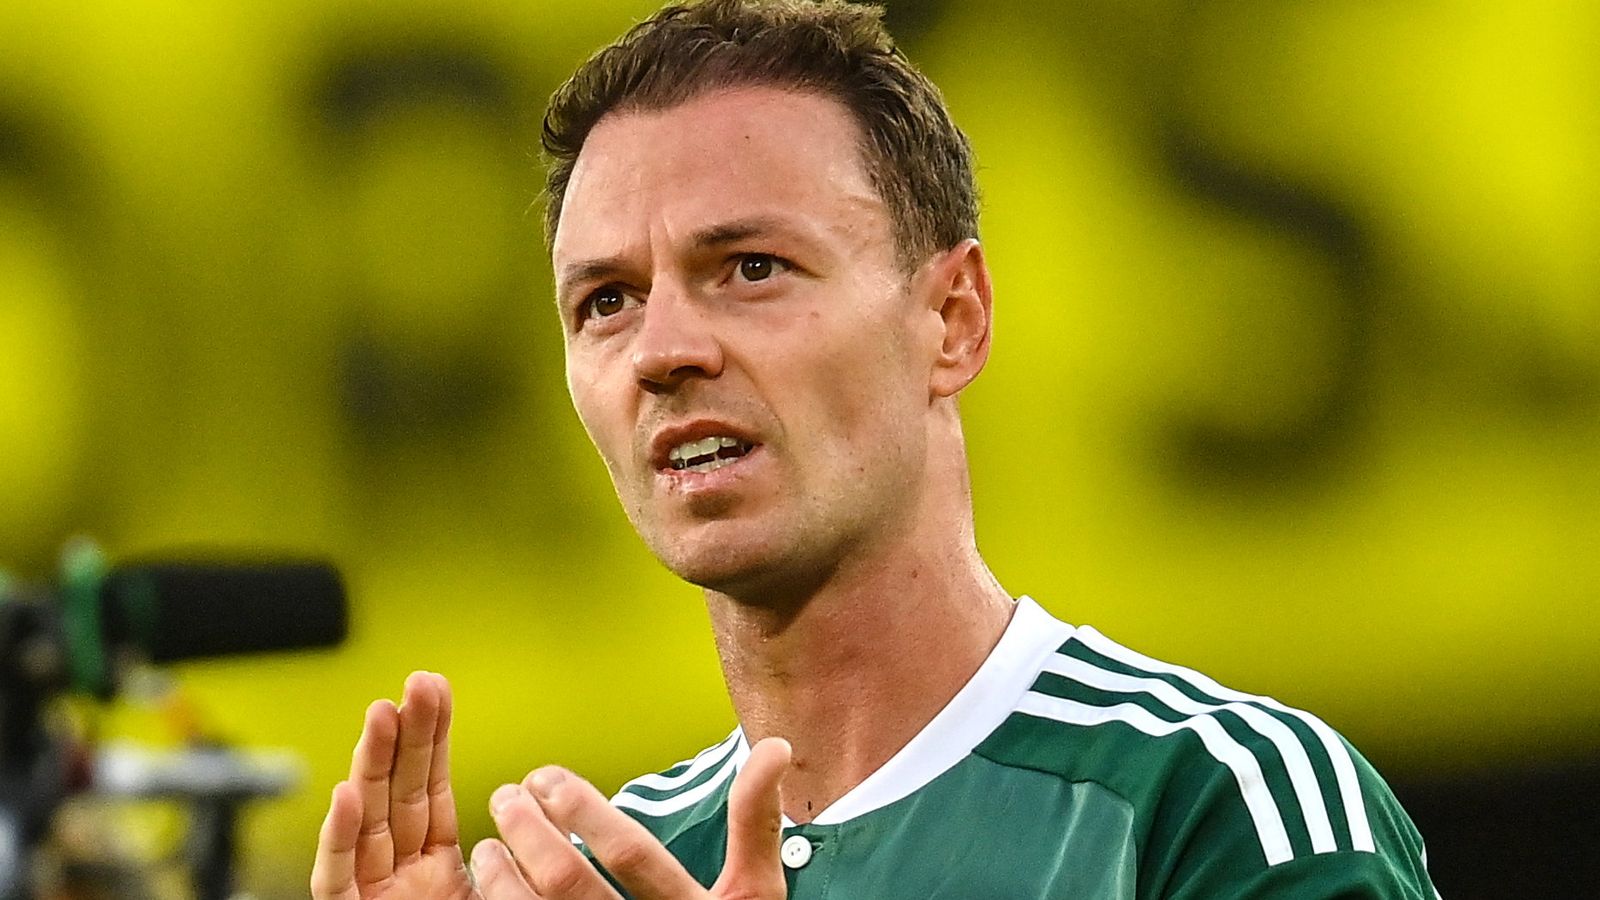 Jonny Evans exclusive: Northern Ireland defender set to win 100th cap against Greece in Nations League - Sky Sports